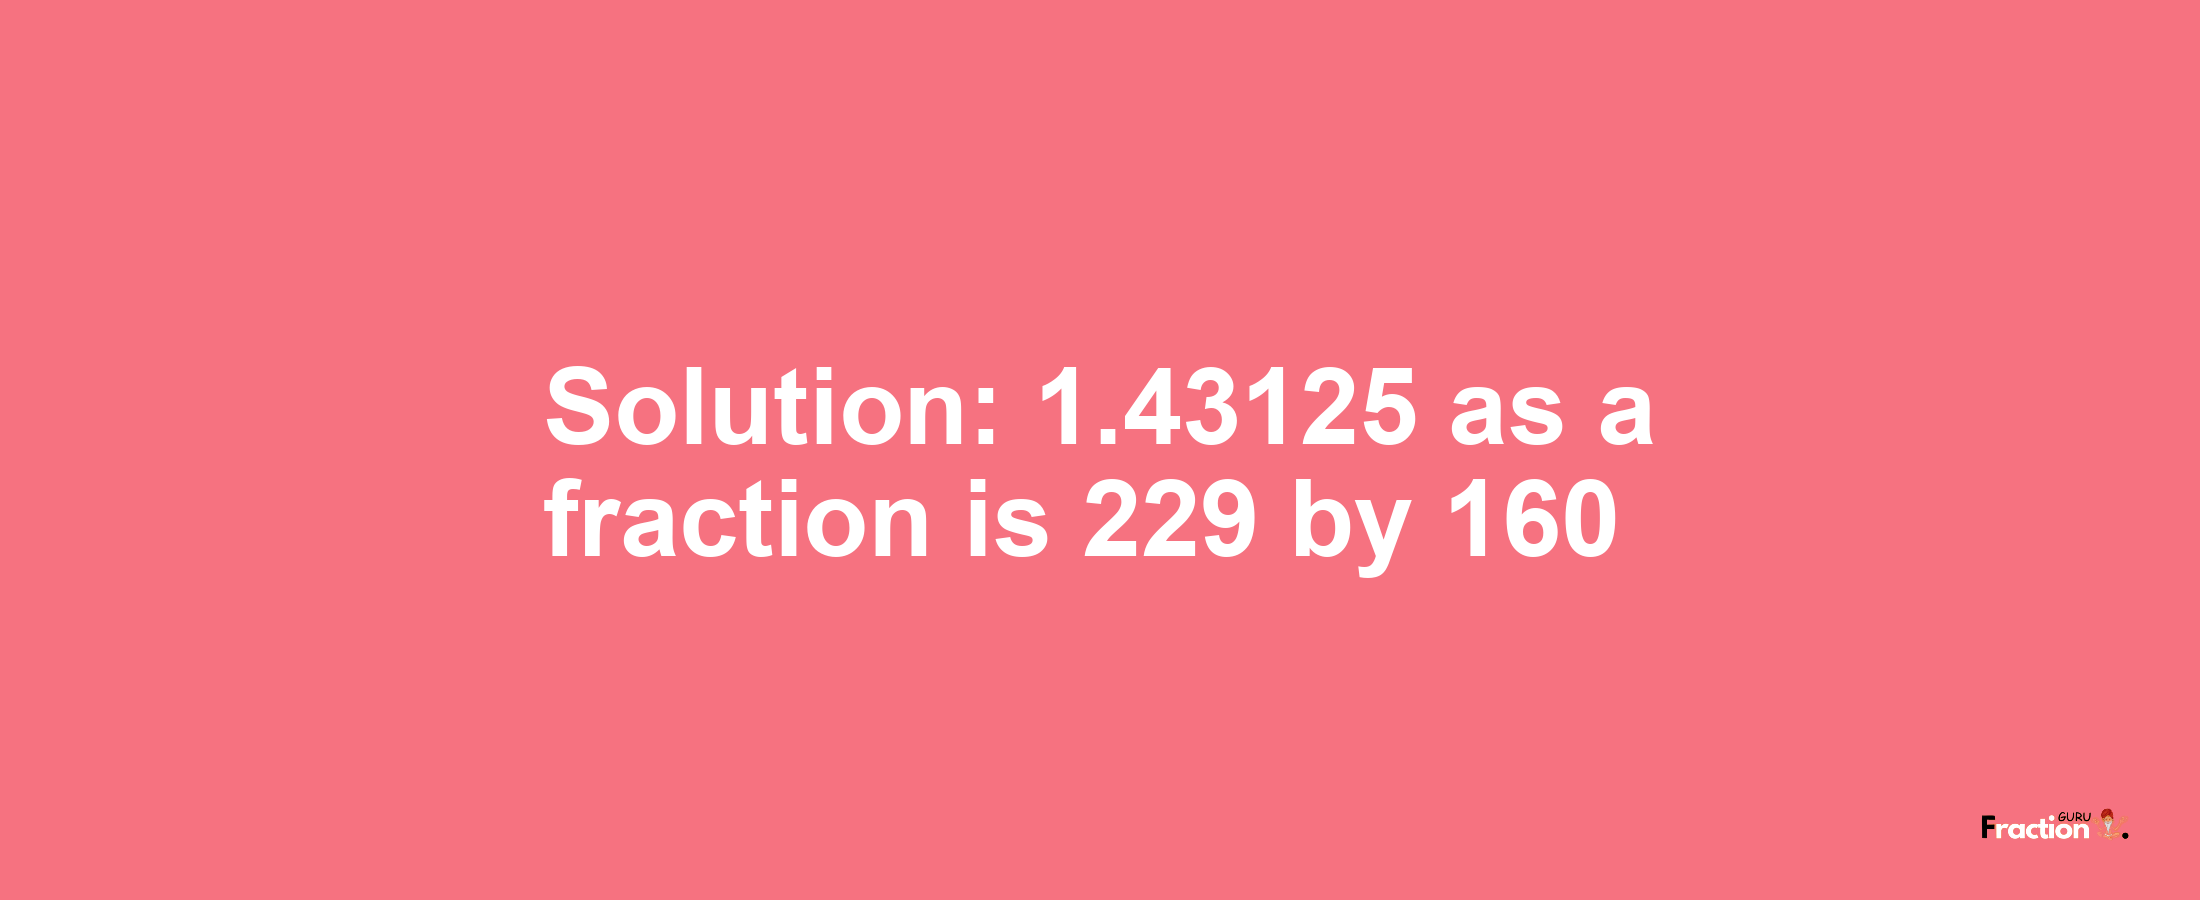 Solution:1.43125 as a fraction is 229/160